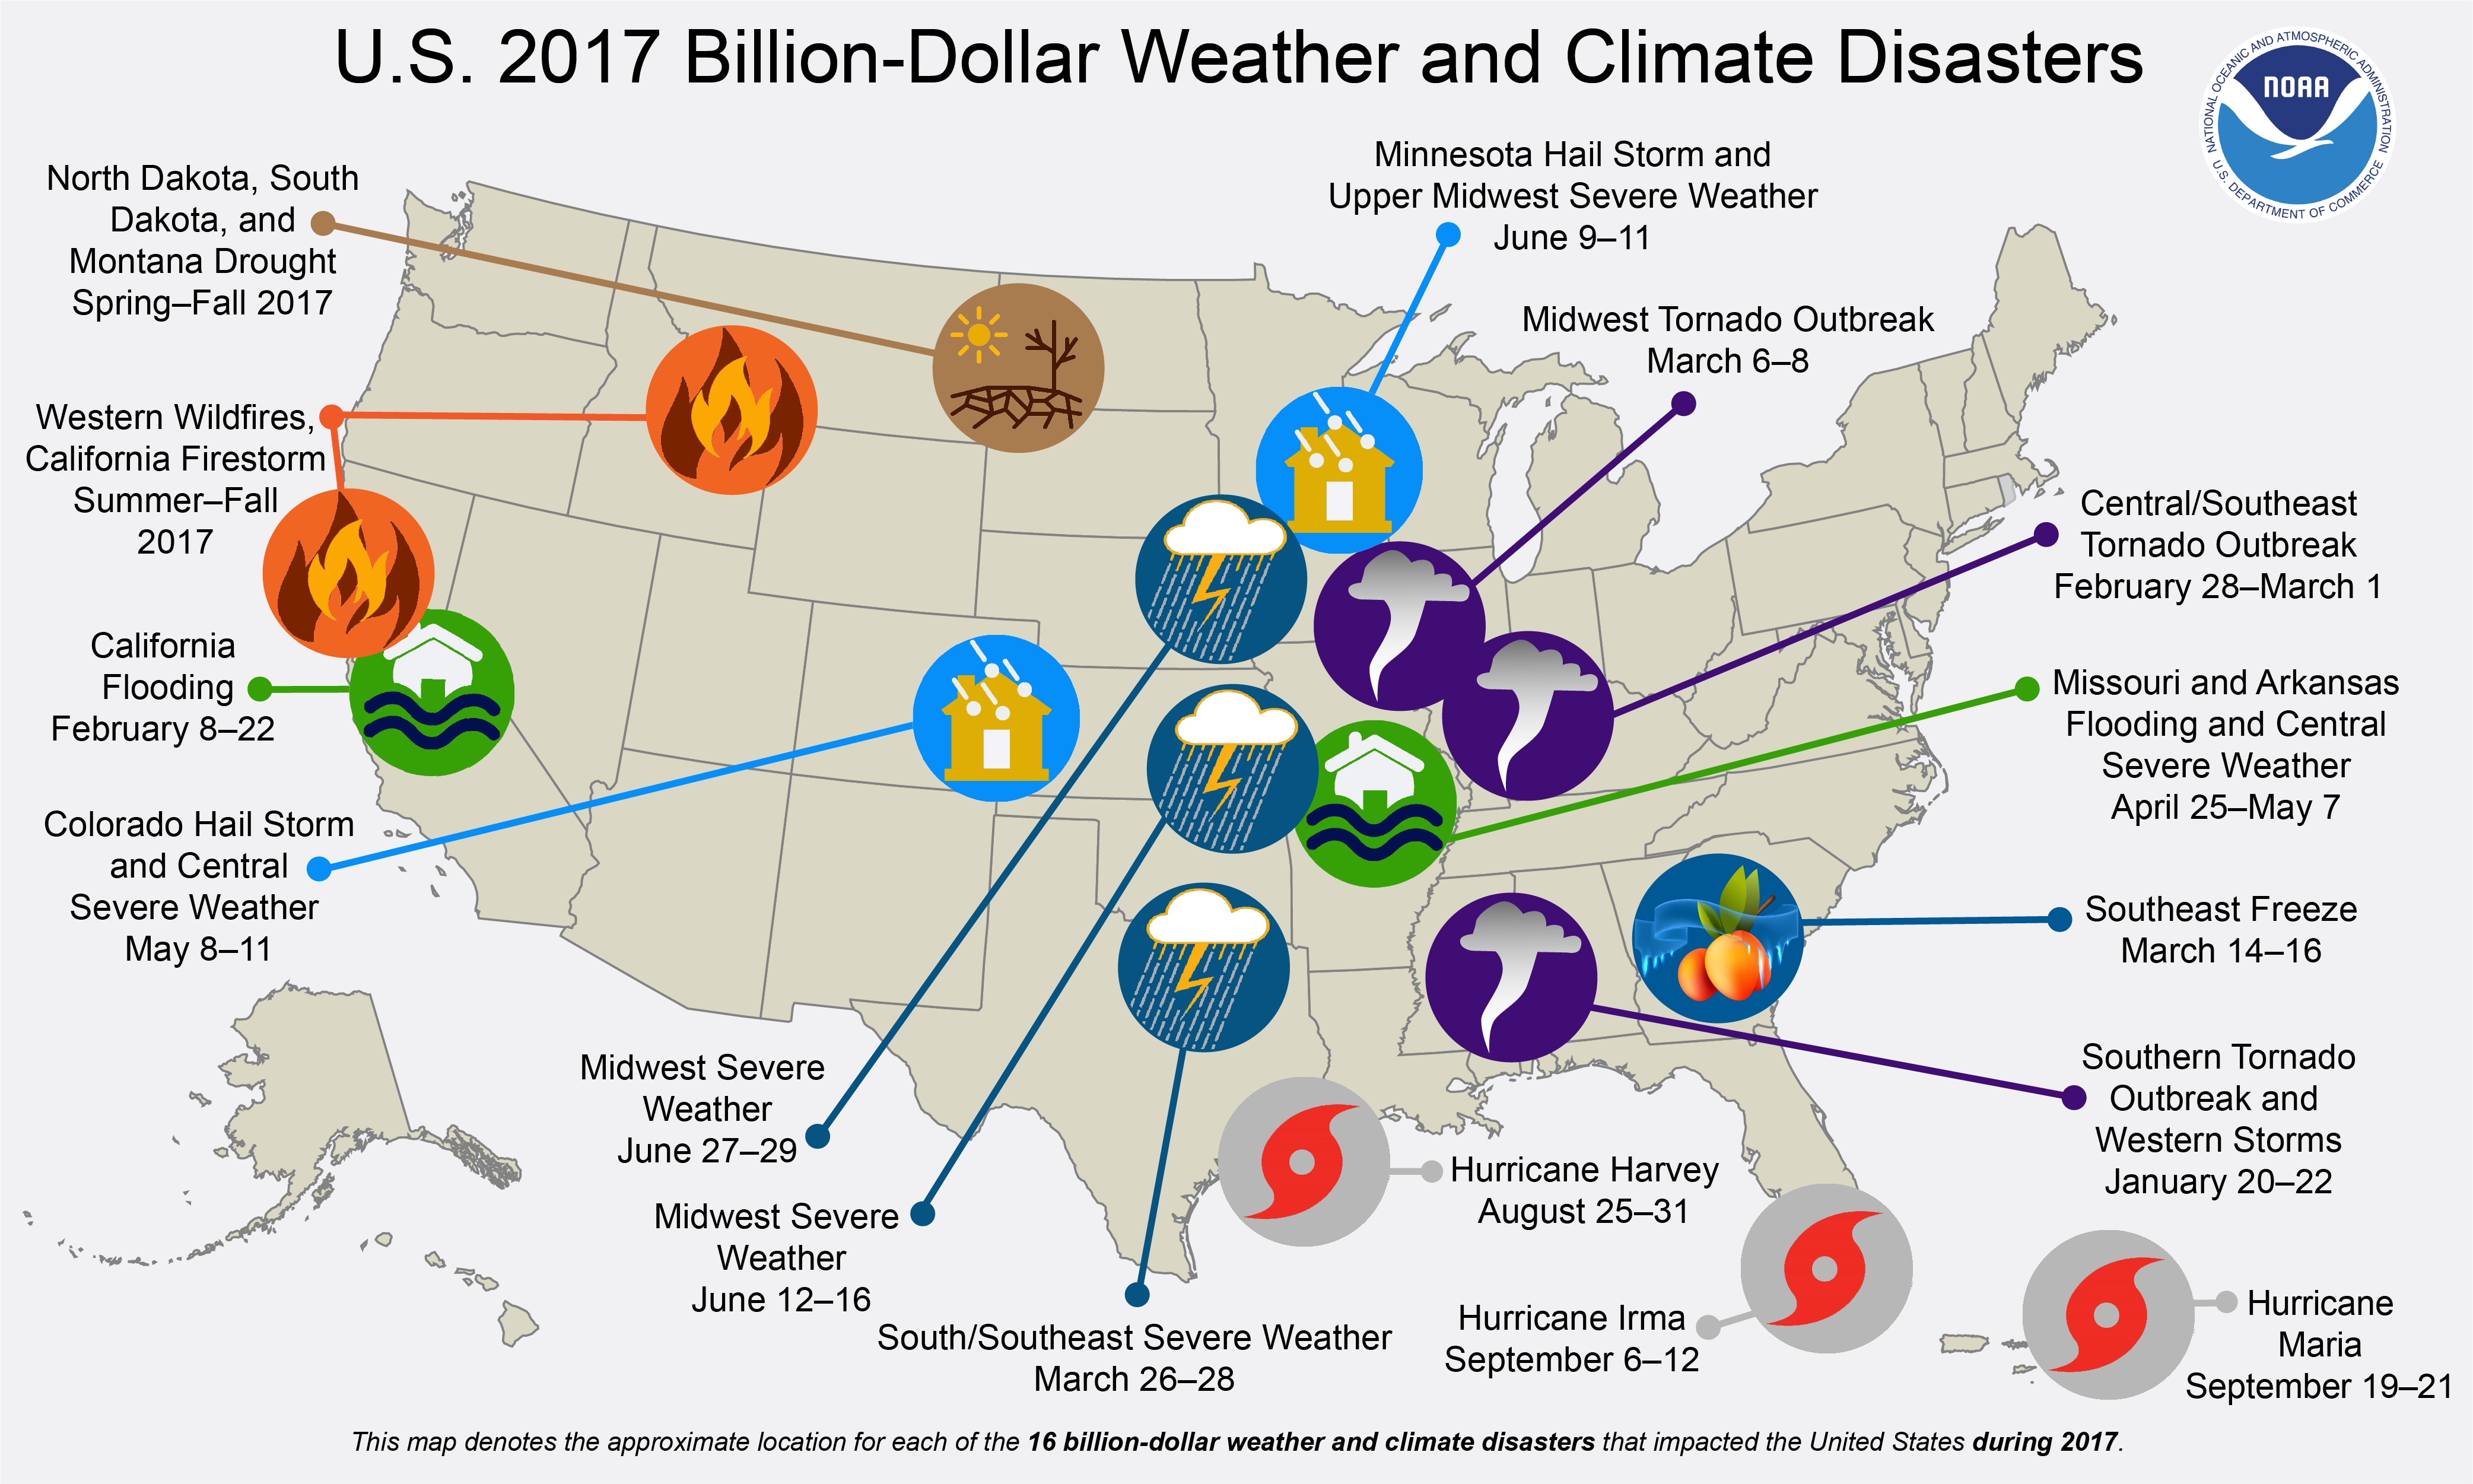 hurricane damage, storm damage, Hurricane Harvey, Hurricane Maria, Hurricane Irma, Puerto Rico hurricane disaster, National Oceanic and Atmospheric Administration reported, climate change costs